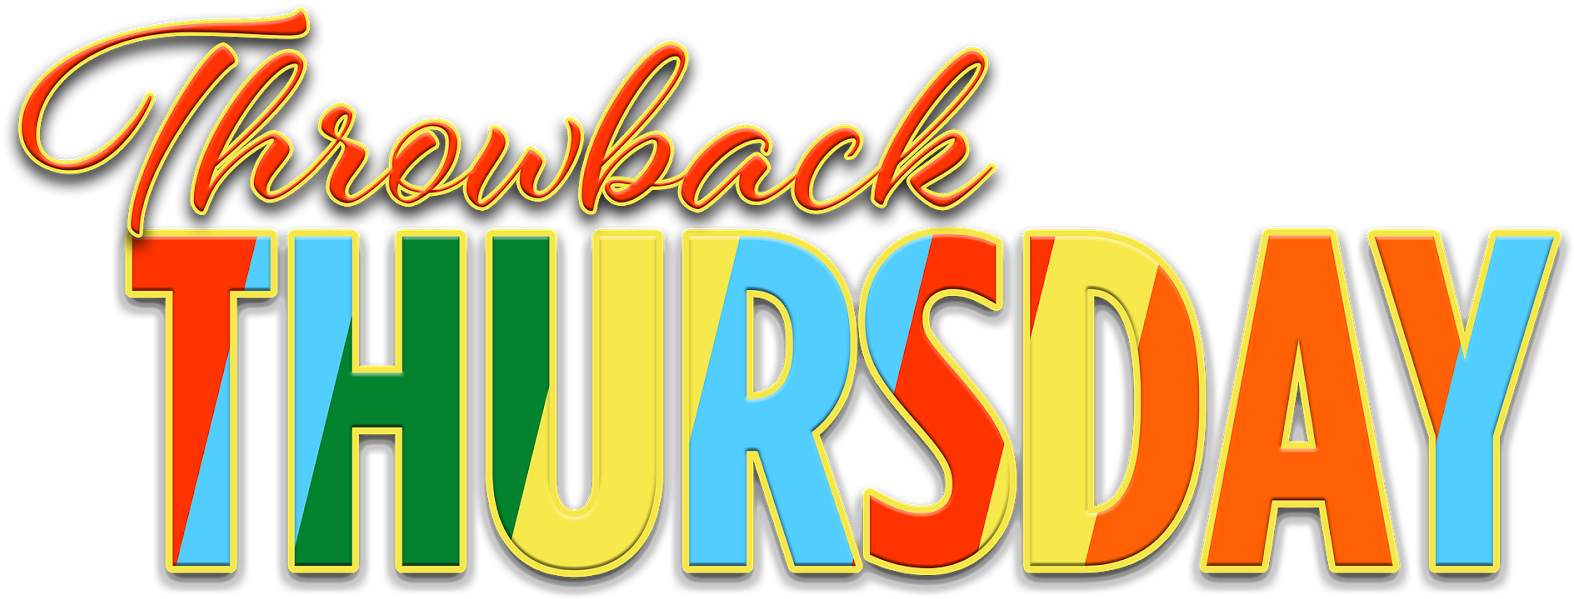 The Concept Of “throwback Thursday” Is To Reflect On - Throwback Thursday Png (1600x635)